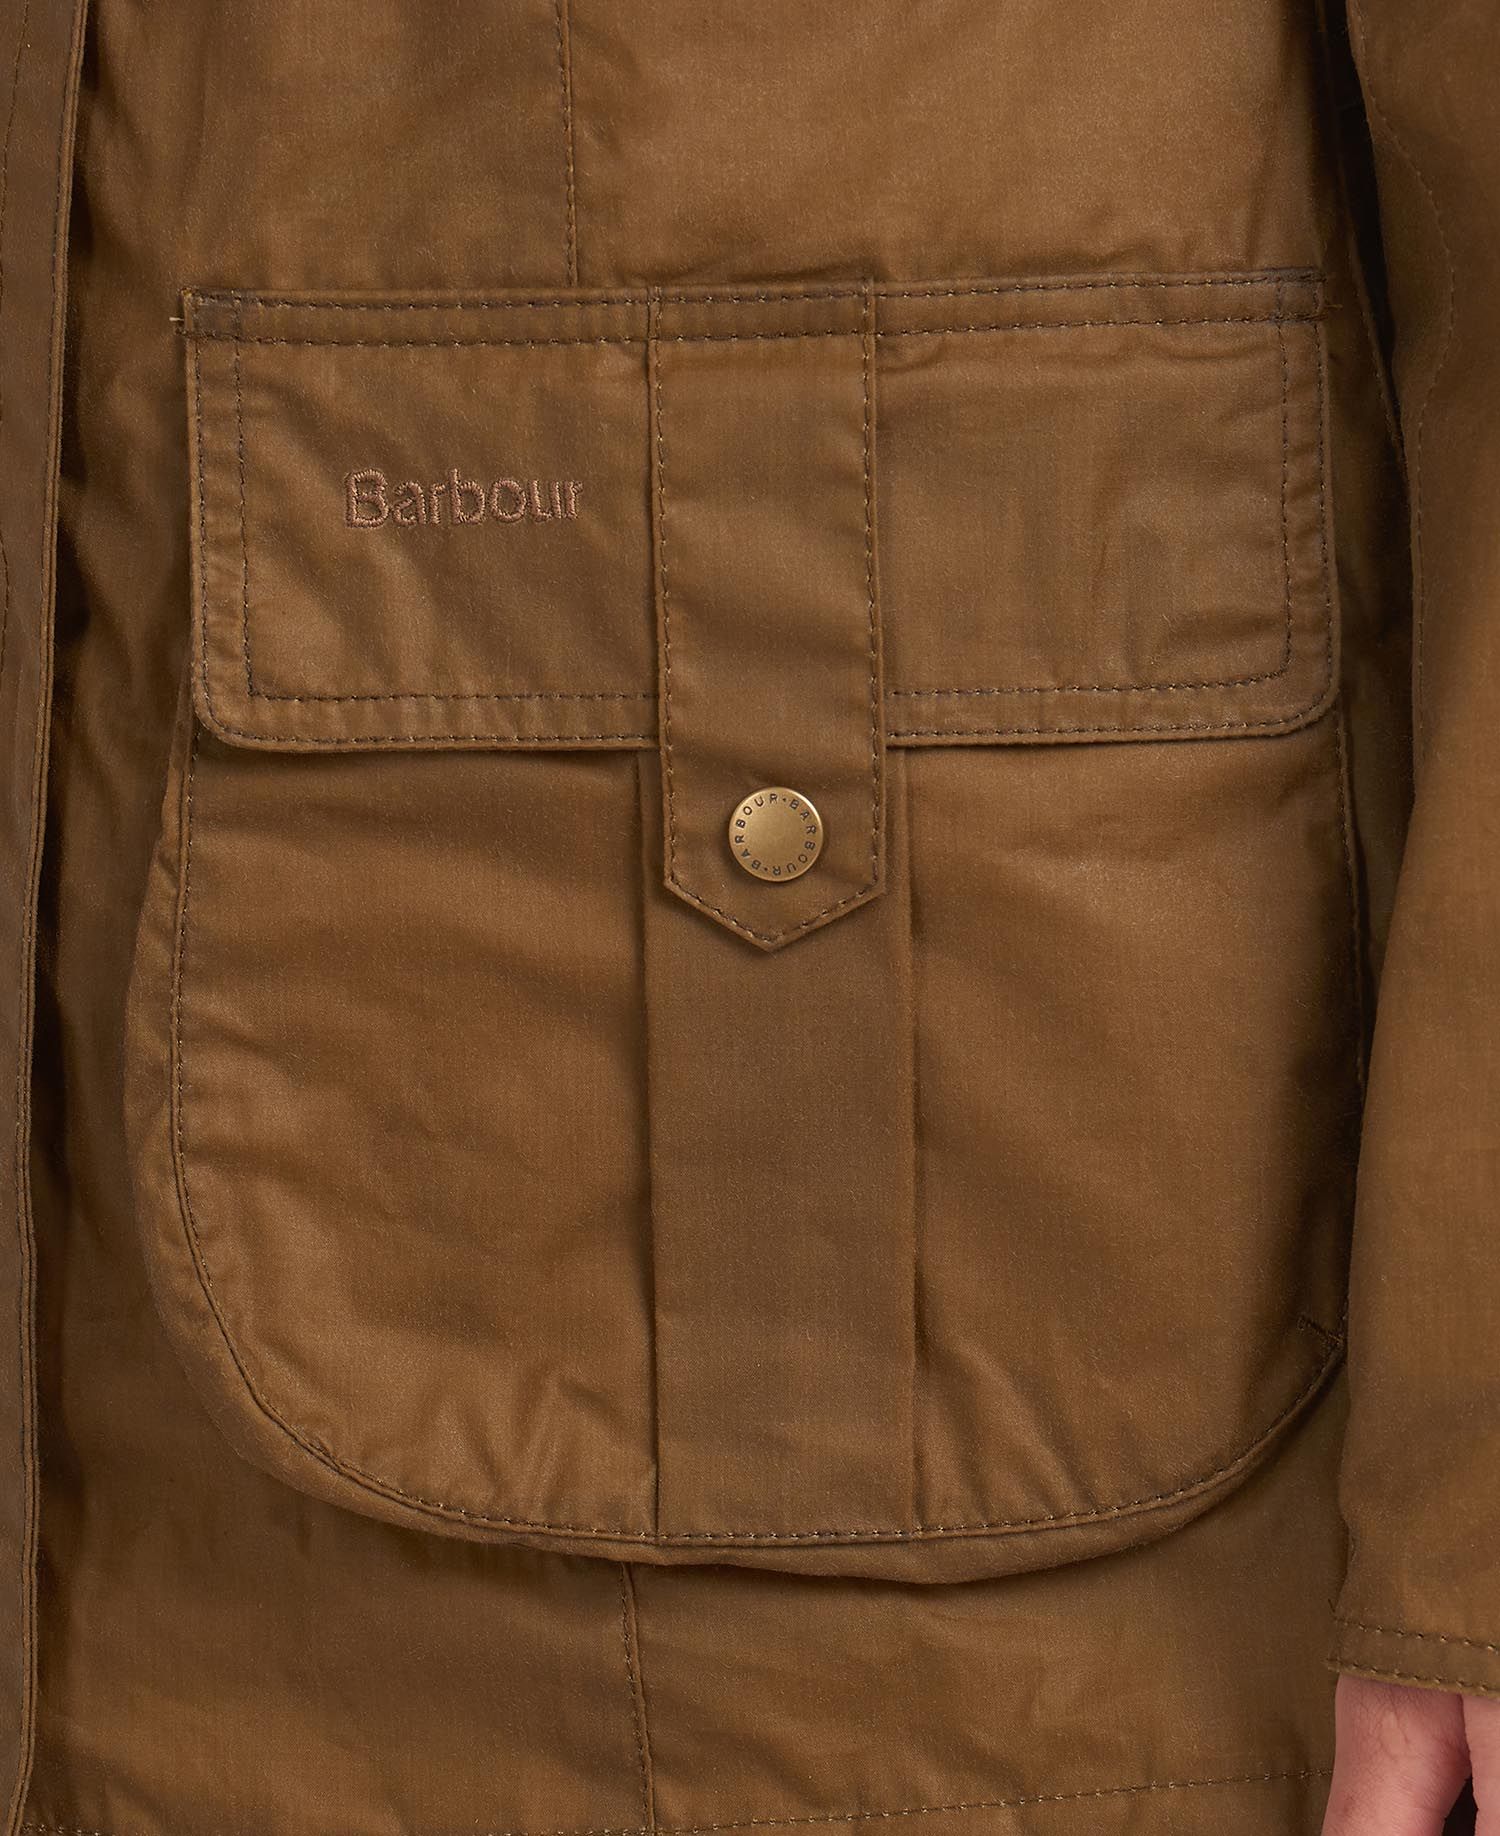 Barbour Lightweight Defence Waxed Cotton Jacket in Beige | Barbour